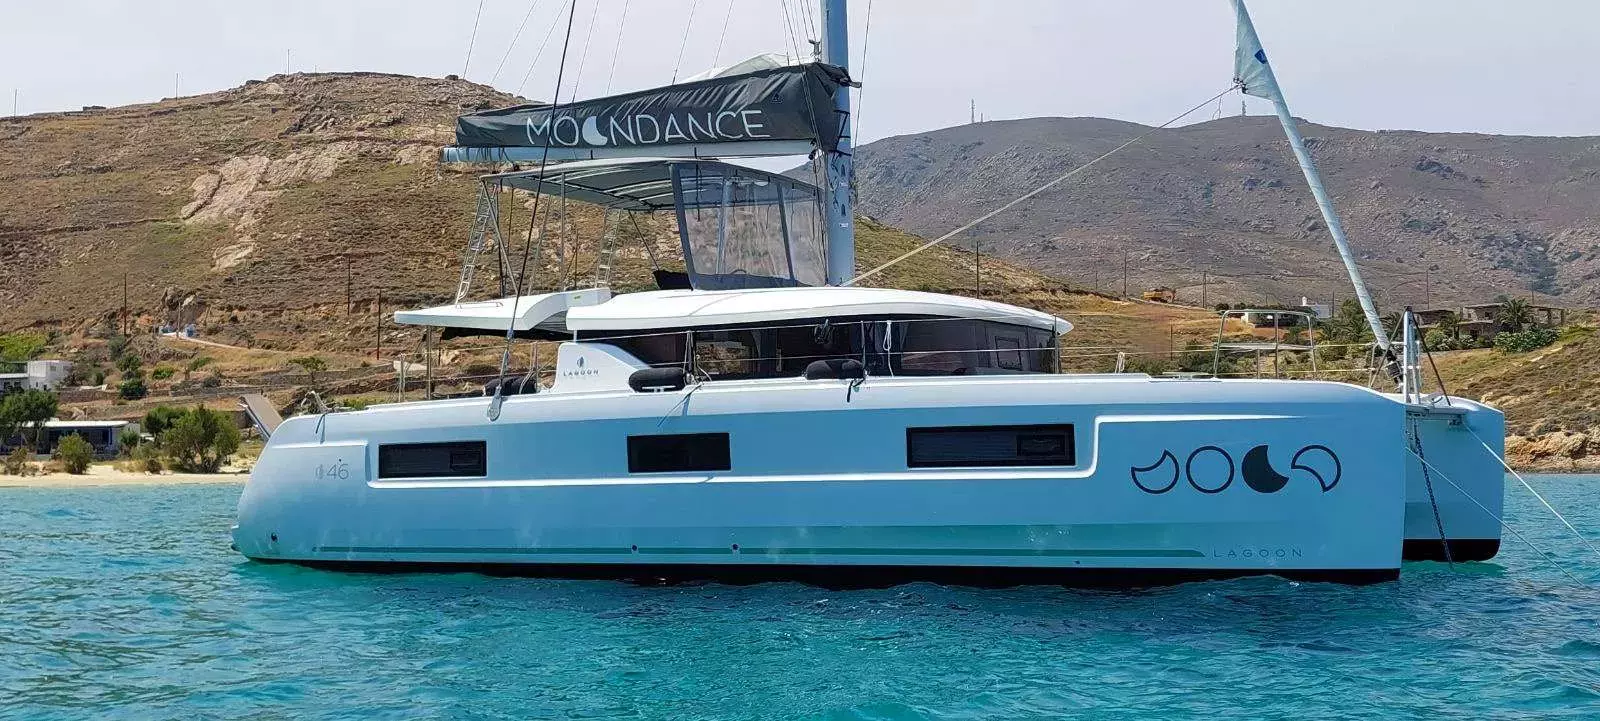 Moondance III by Lagoon - Special Offer for a private Power Catamaran Charter in Mykonos with a crew